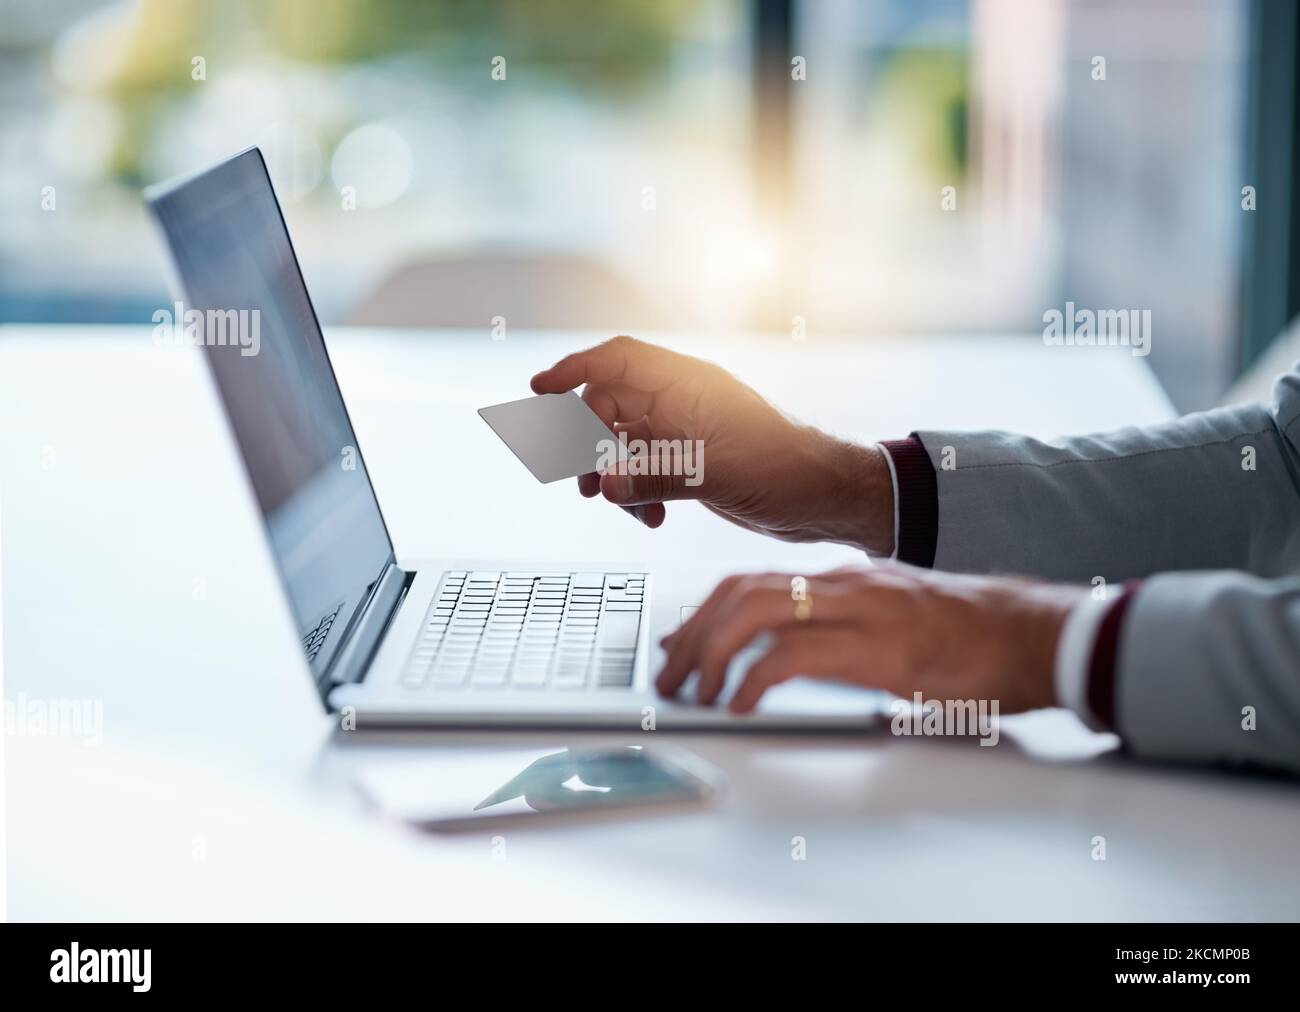 Making transfers with ease. an unrecognizable businessman holding his credit card while using a laptop at his desk. Stock Photo